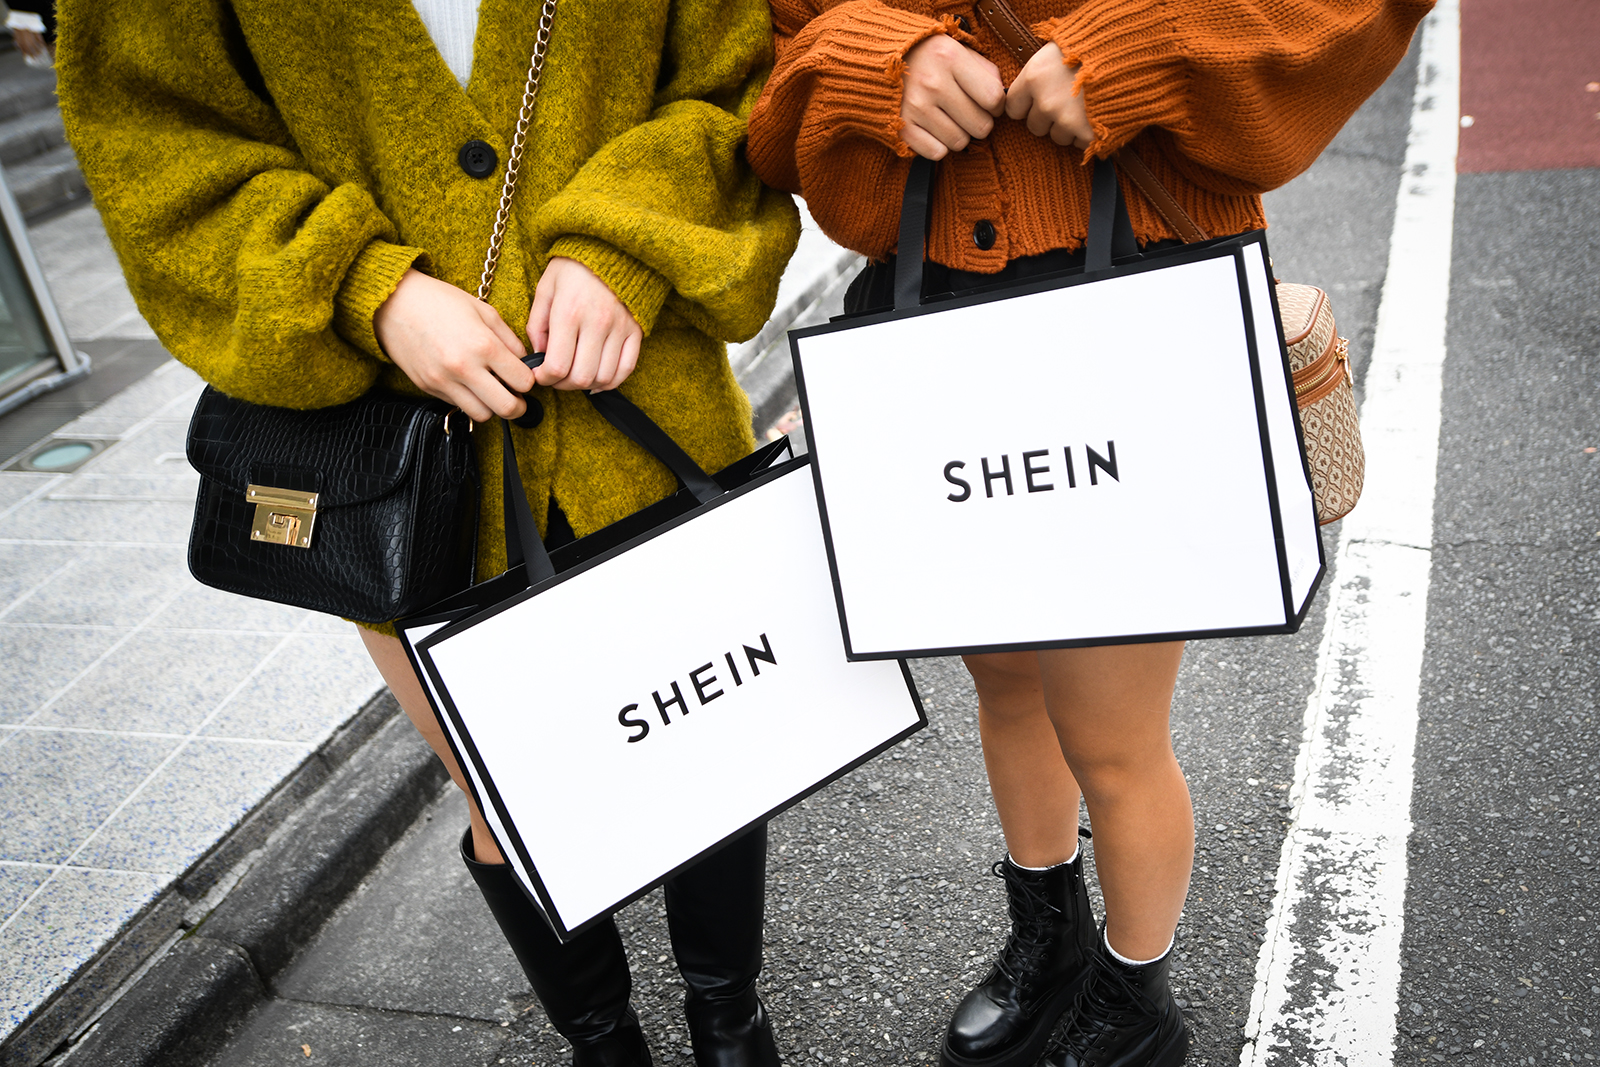 Fast-fashion giant Shein investigated its own factories after damning  report on working conditions—and the results are costing $15 million to fix